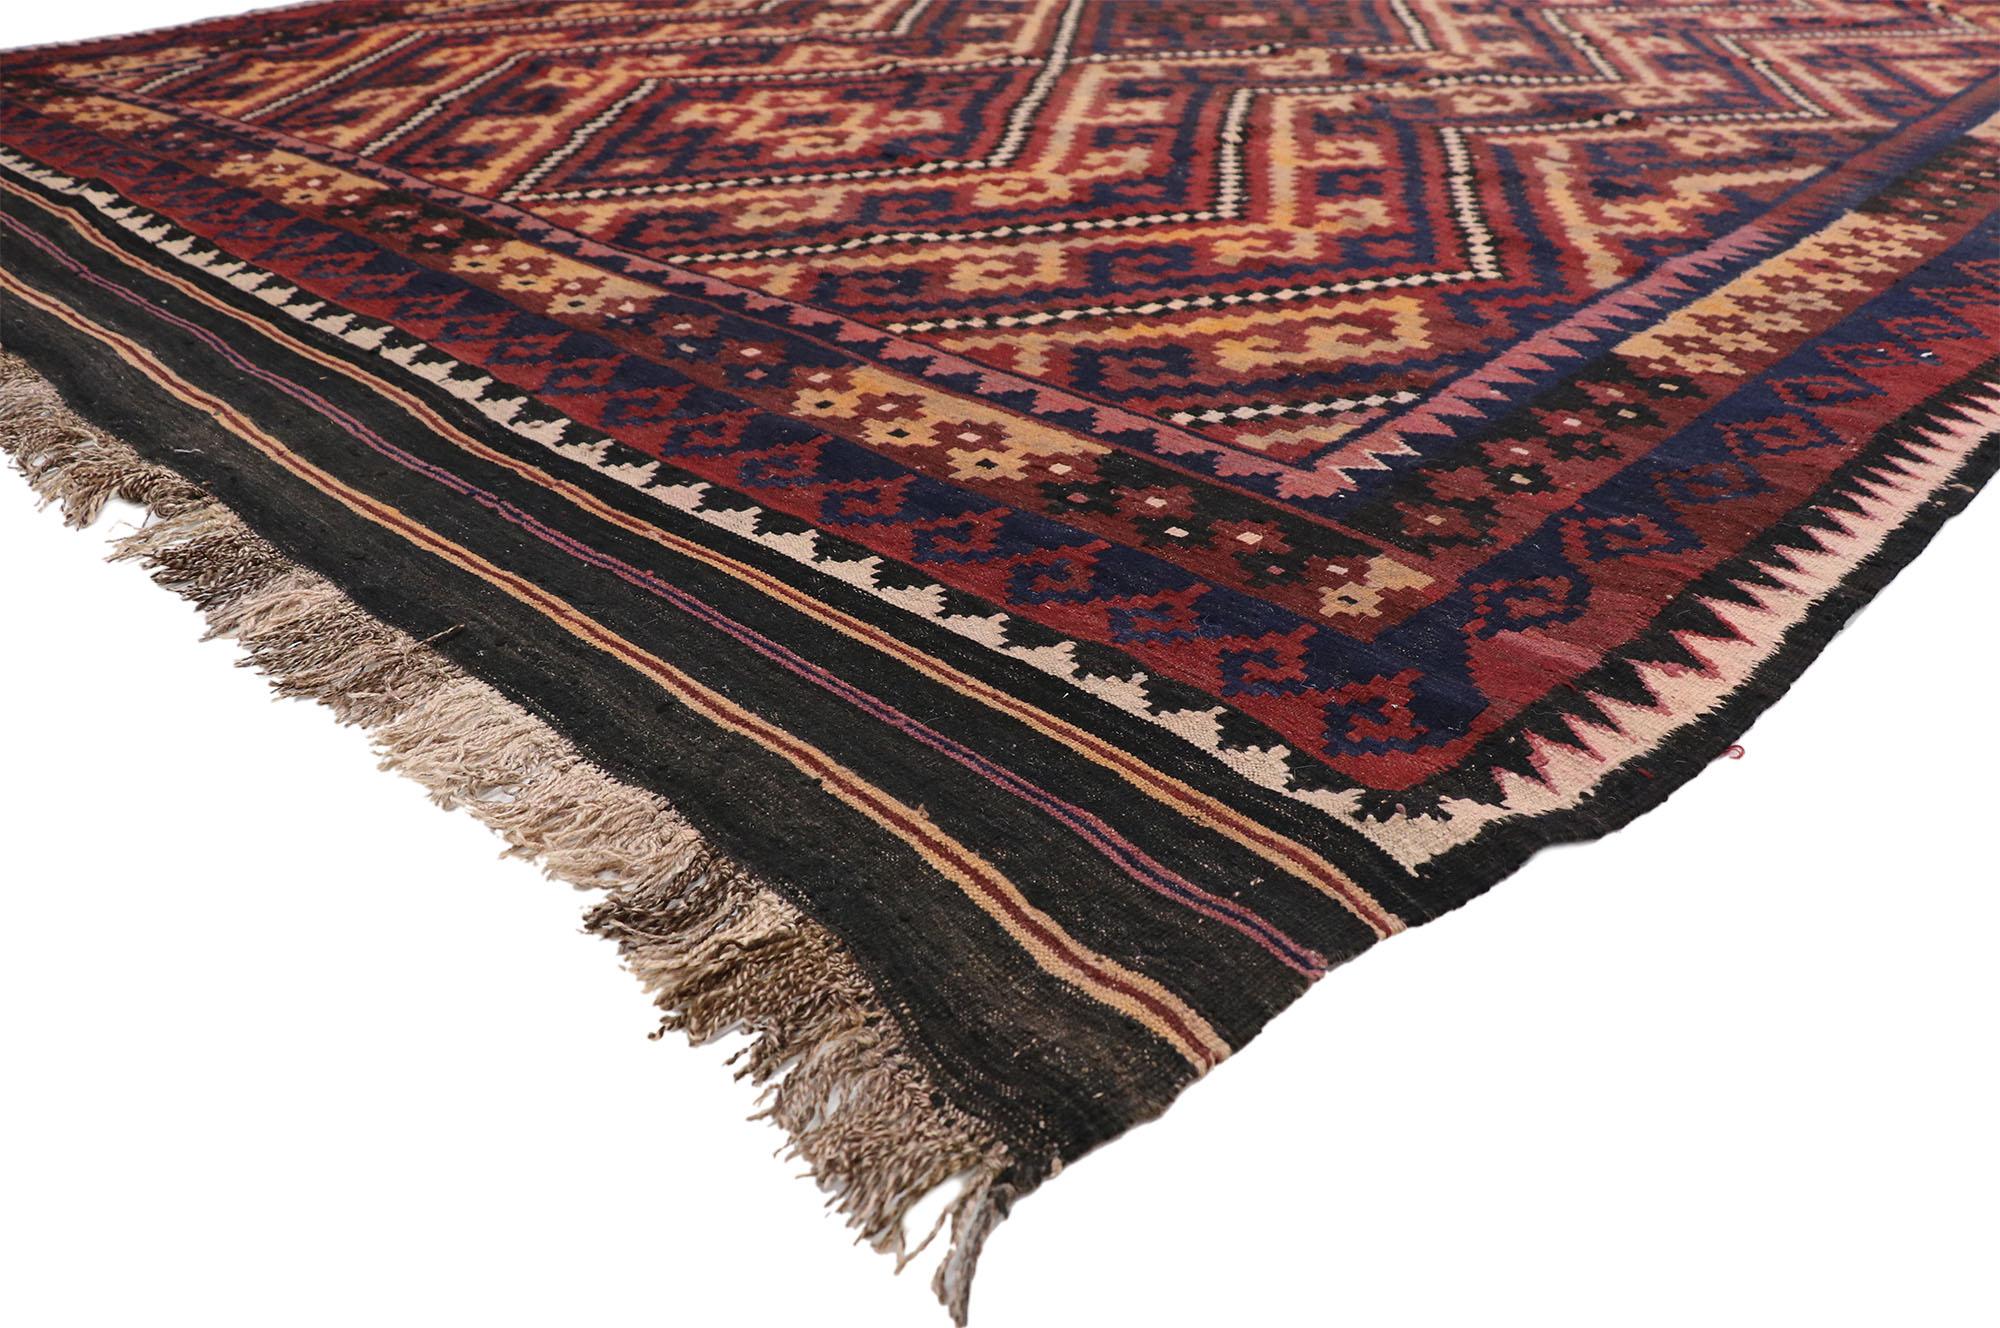 72260 Vintage Afghan Maimana Kilim Rug, 08'10 x 14'00. Vintage Afghan Maimana Kilim rugs are handwoven in Afghanistan, particularly in the Maimana region, known for their vibrant and geometric designs. Made primarily from hand-spun wool and natural